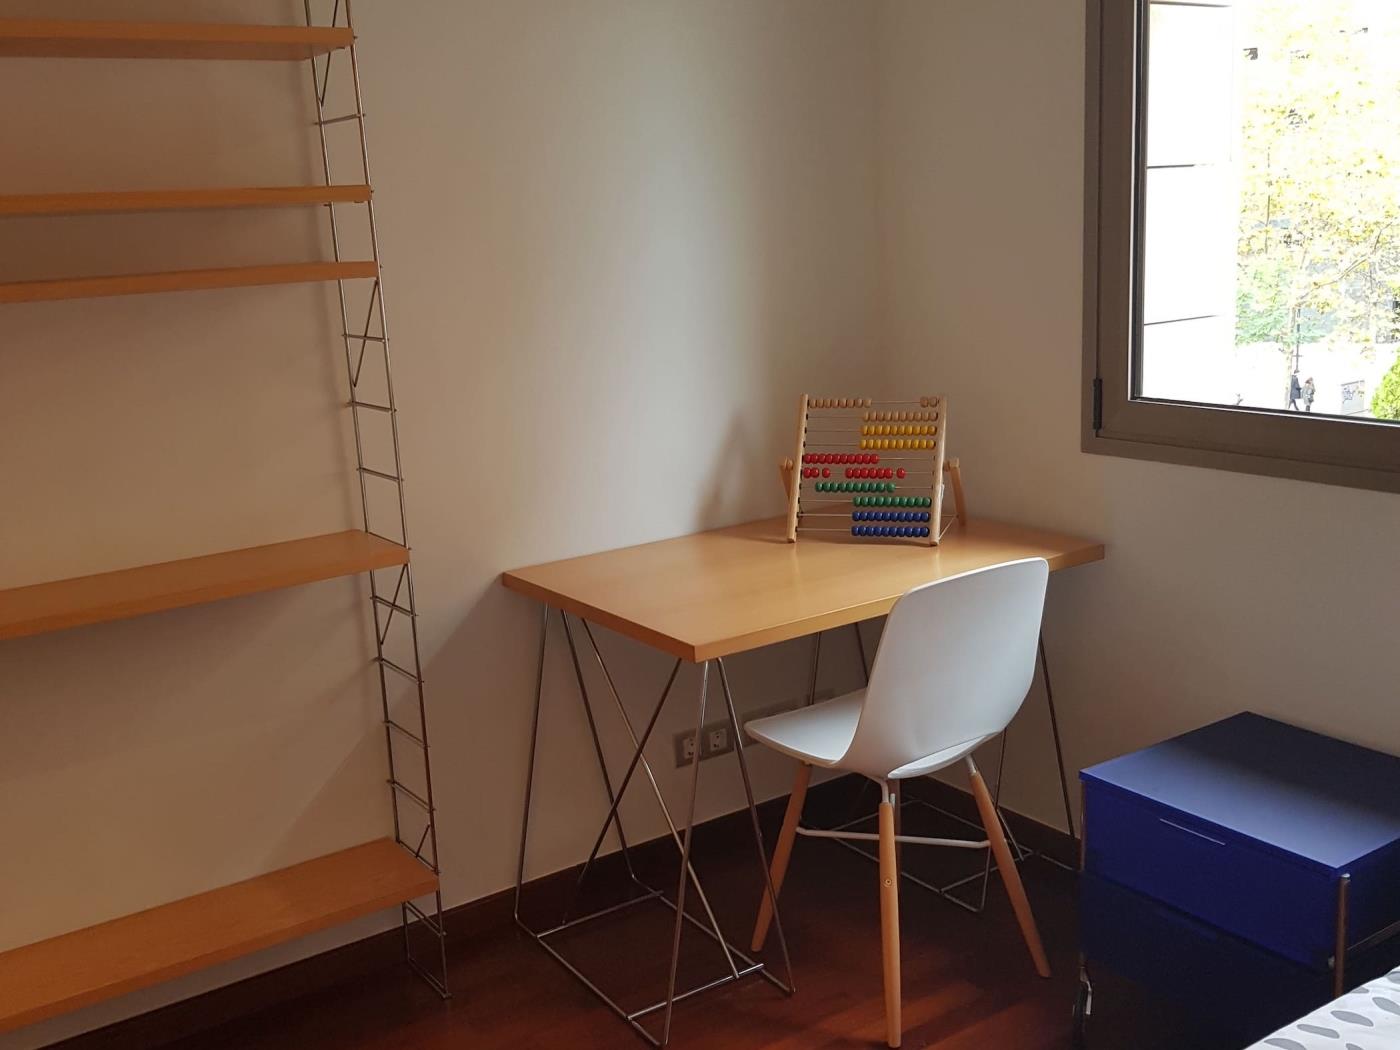 Superb 2 Bedroom apartment & 2 bathroom in Sant Gervasi for Monthly Rental - My Space Barcelona Apartments